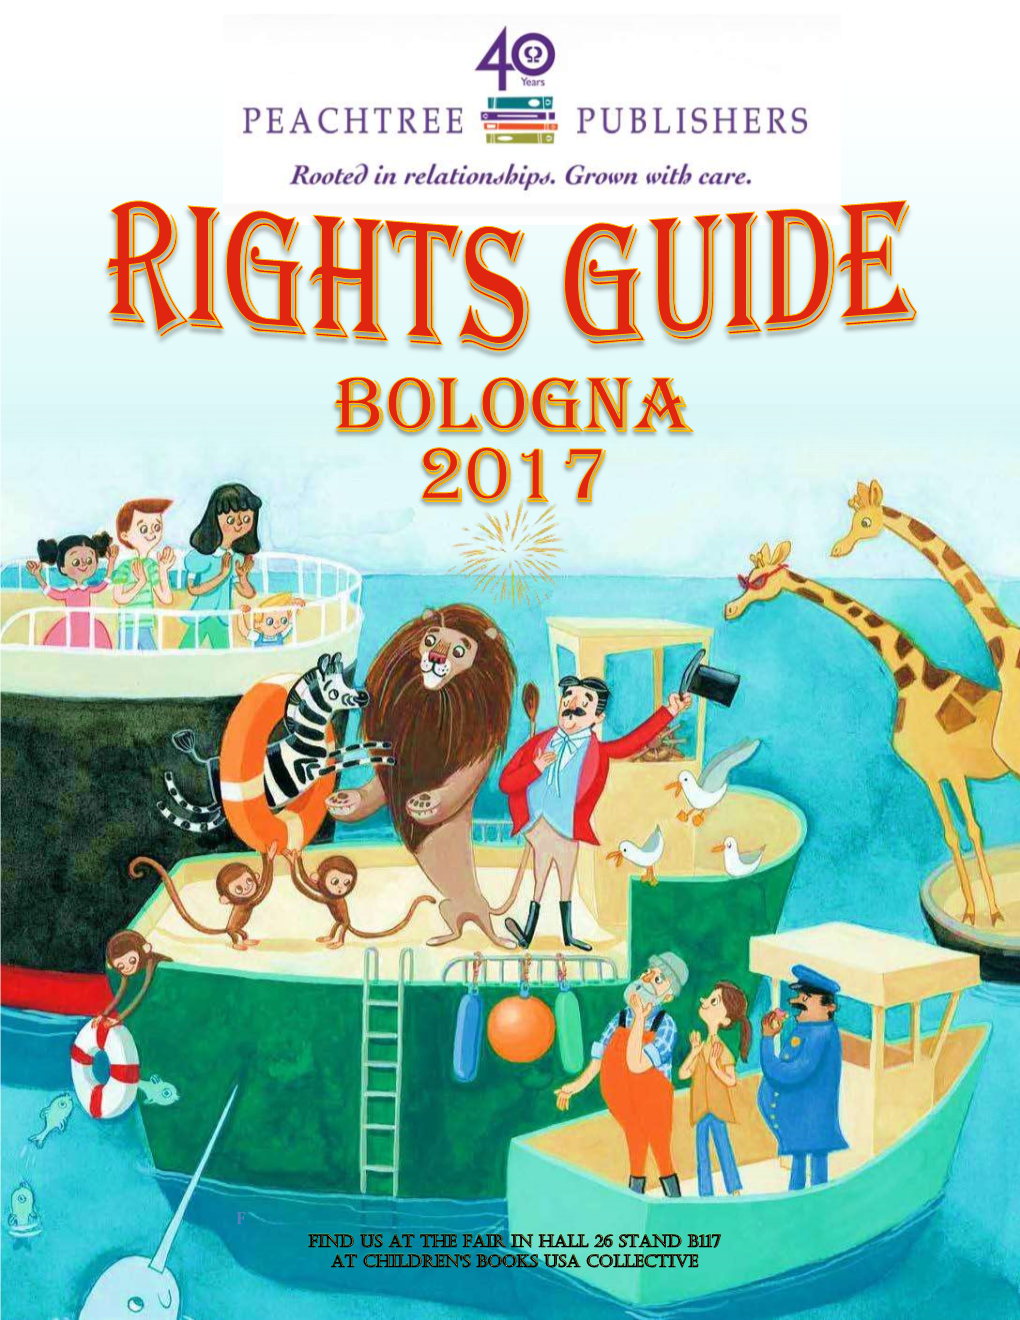 Peachtree Publishers | Bologna 2017 | Children's Rights Guide F for Reading Copies, Please Contact Farah Géhy at Gehy@Peachtree-Online.Com